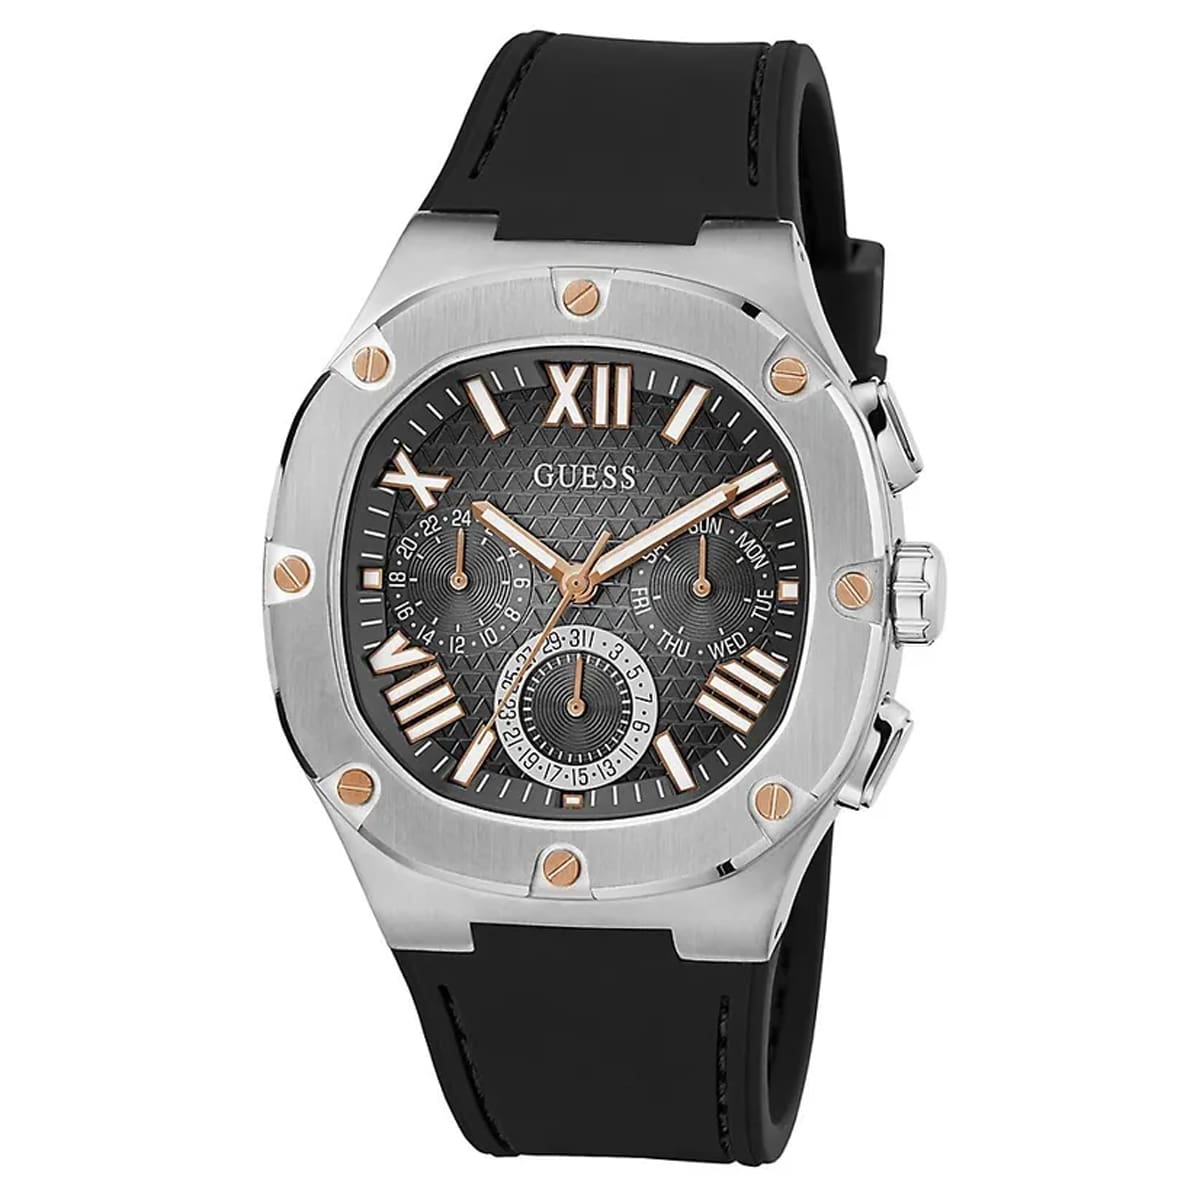 MONTRE GUESS HEADLINE HOMME M.FONCTION SILICONE